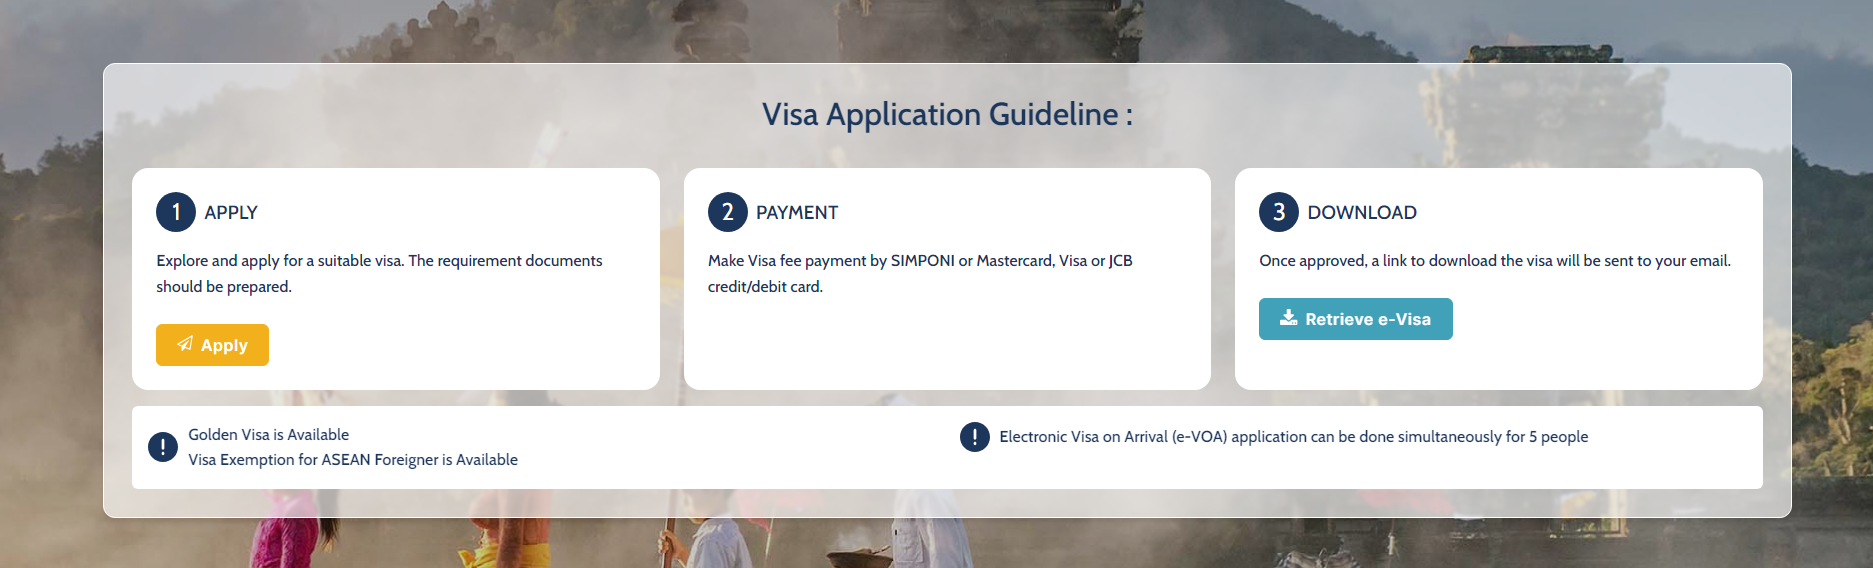 How to Apply for an Indonesian e-visa?